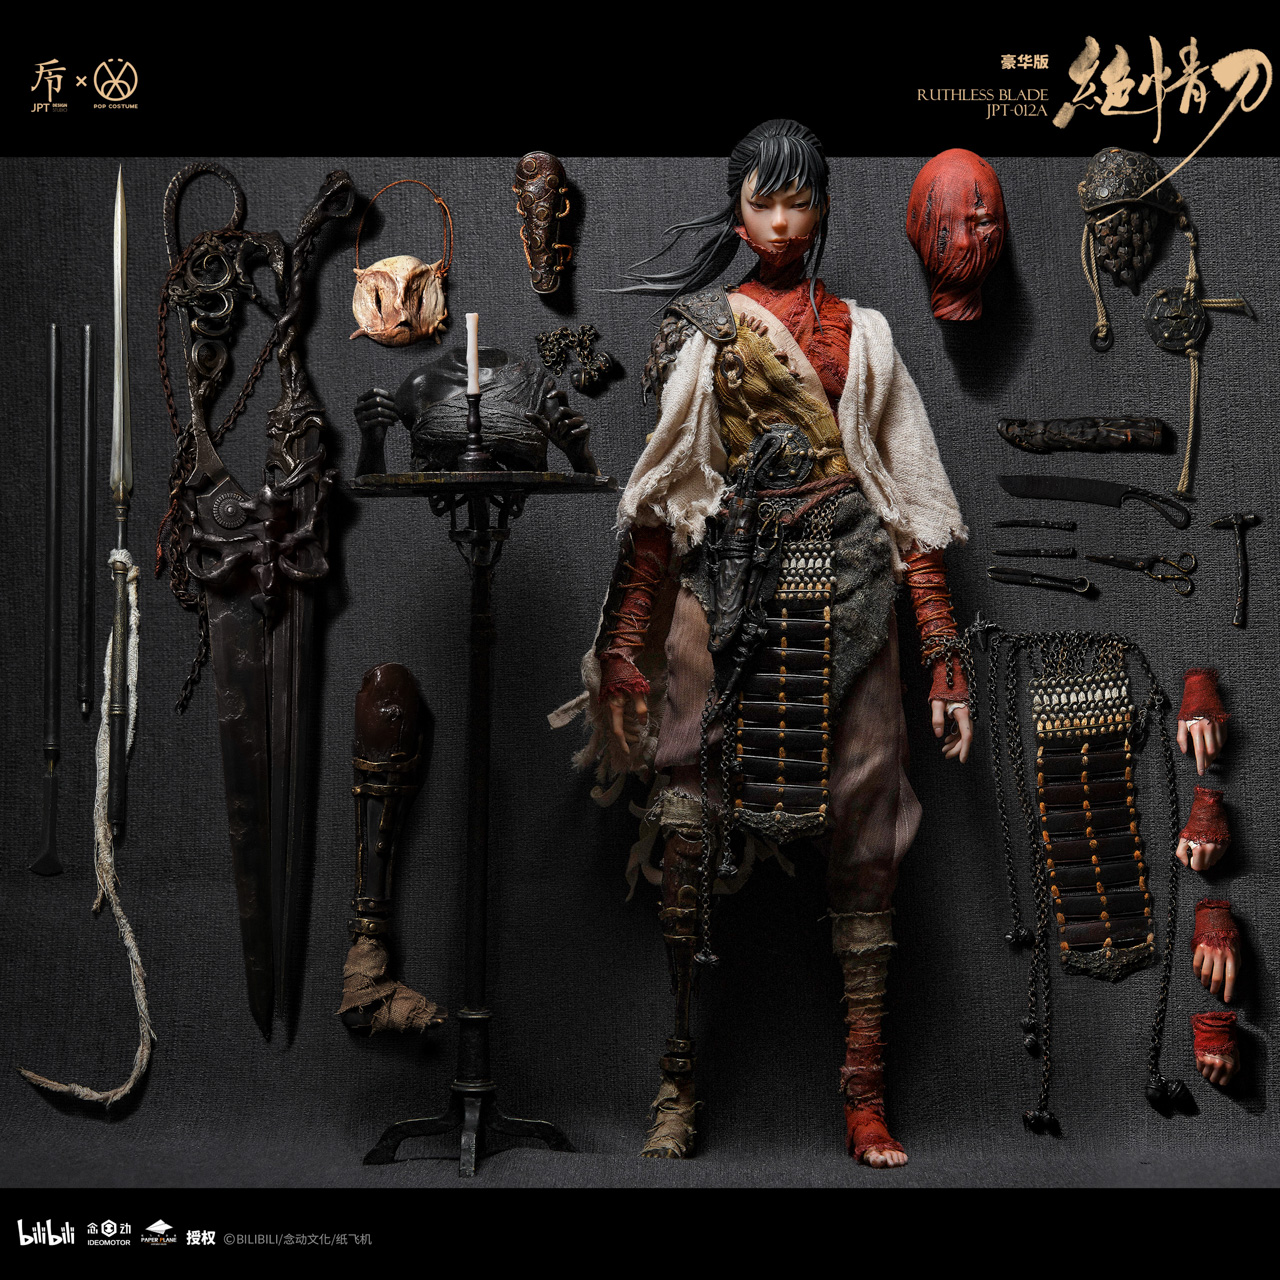 POPCOSTUME×JPTdesign 1/6 Action Figures -RUTHLESS BLADE  JPT-012A